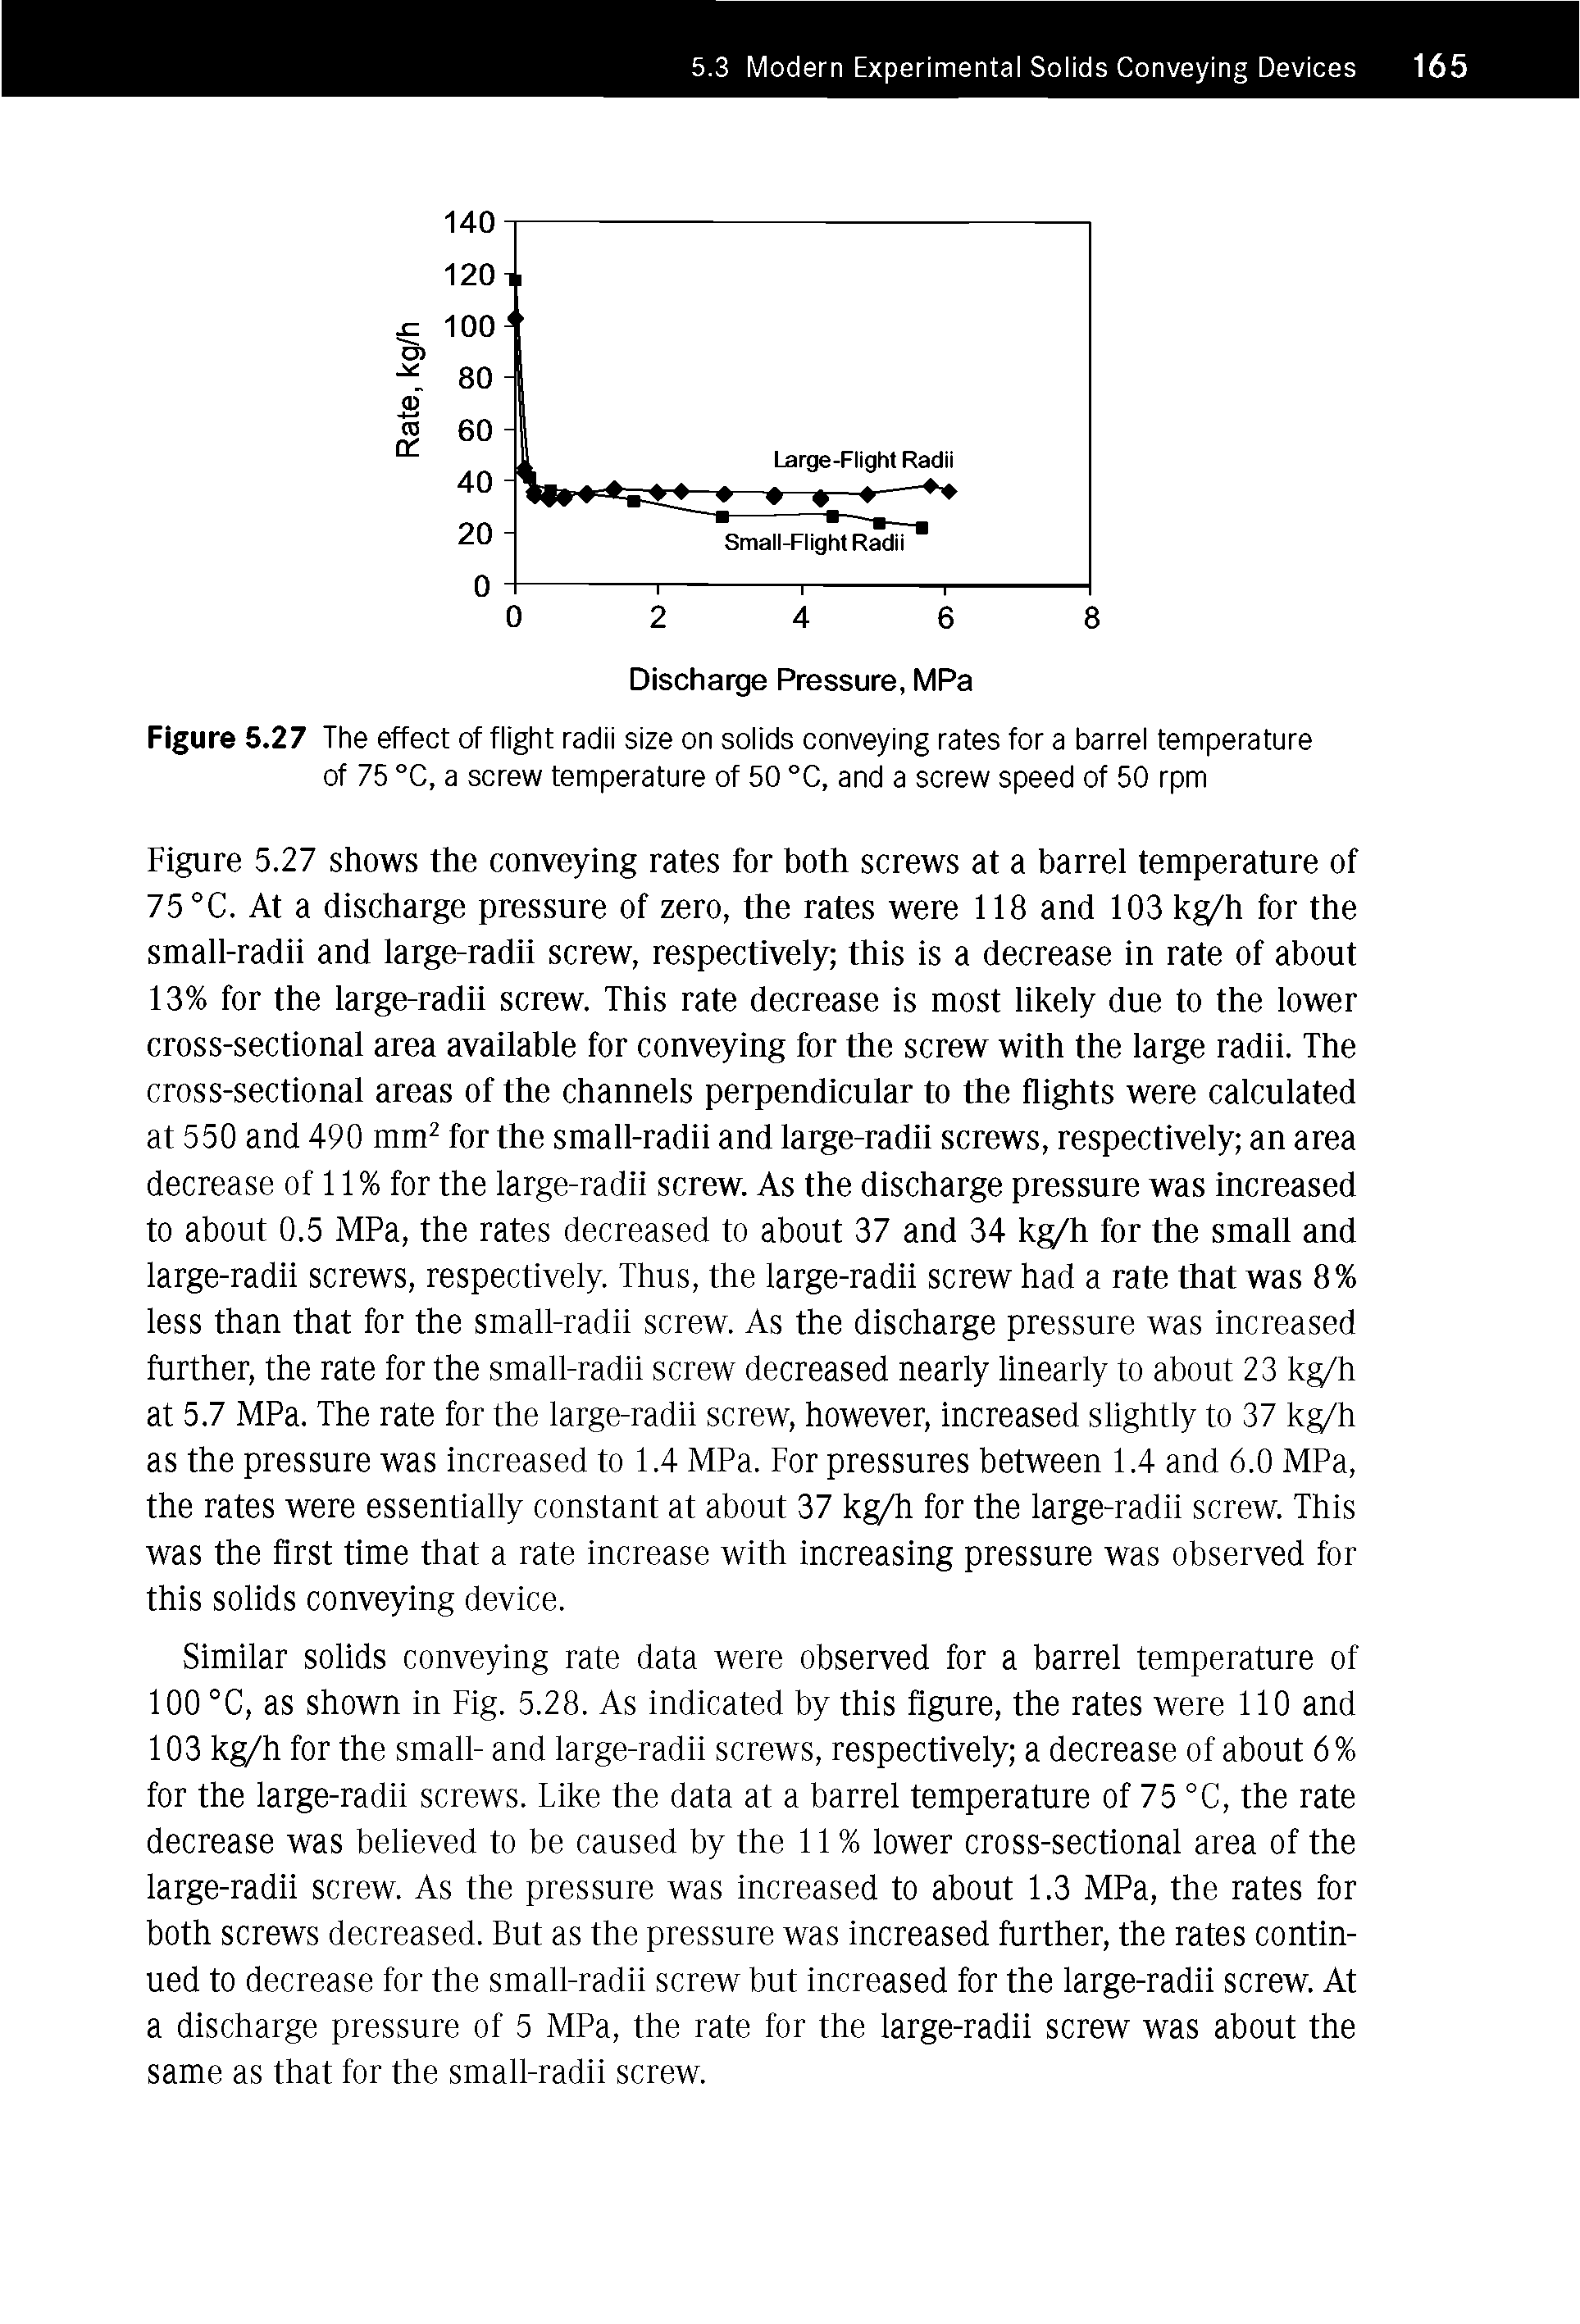 Figure 5.27 The effect of flight radii size on solids conveying rates for a barrel temperature of 75 °C, a screw temperature of 50 °C, and a screw speed of 50 rpm...